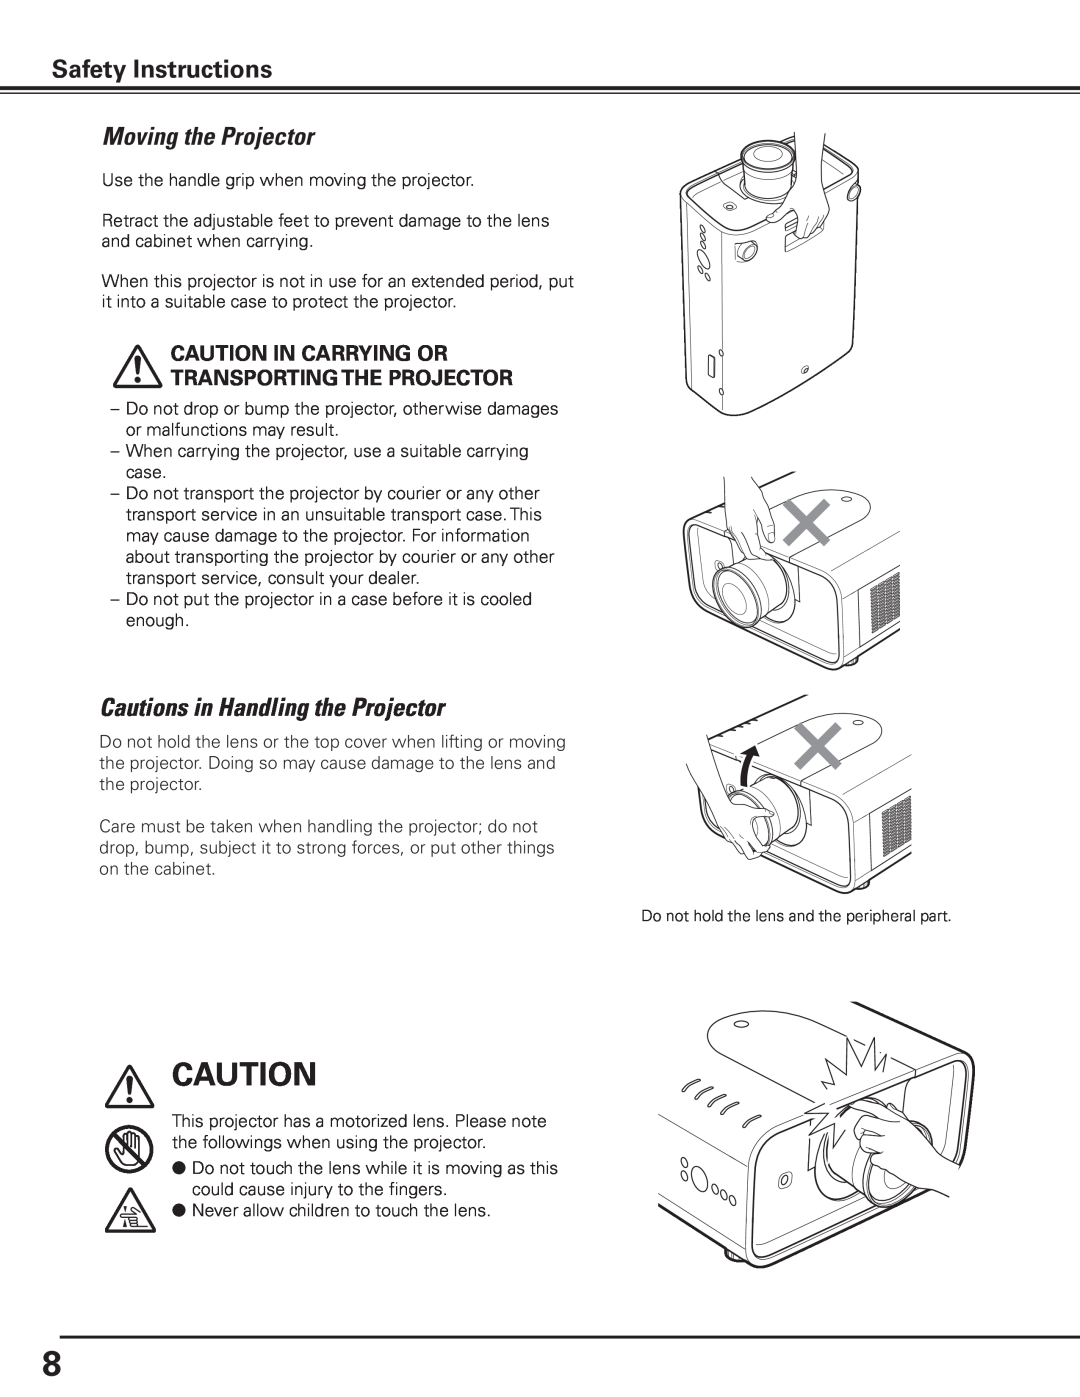 Canon 7585 manual Moving the Projector, Cautions in Handling the Projector, Safety Instructions 